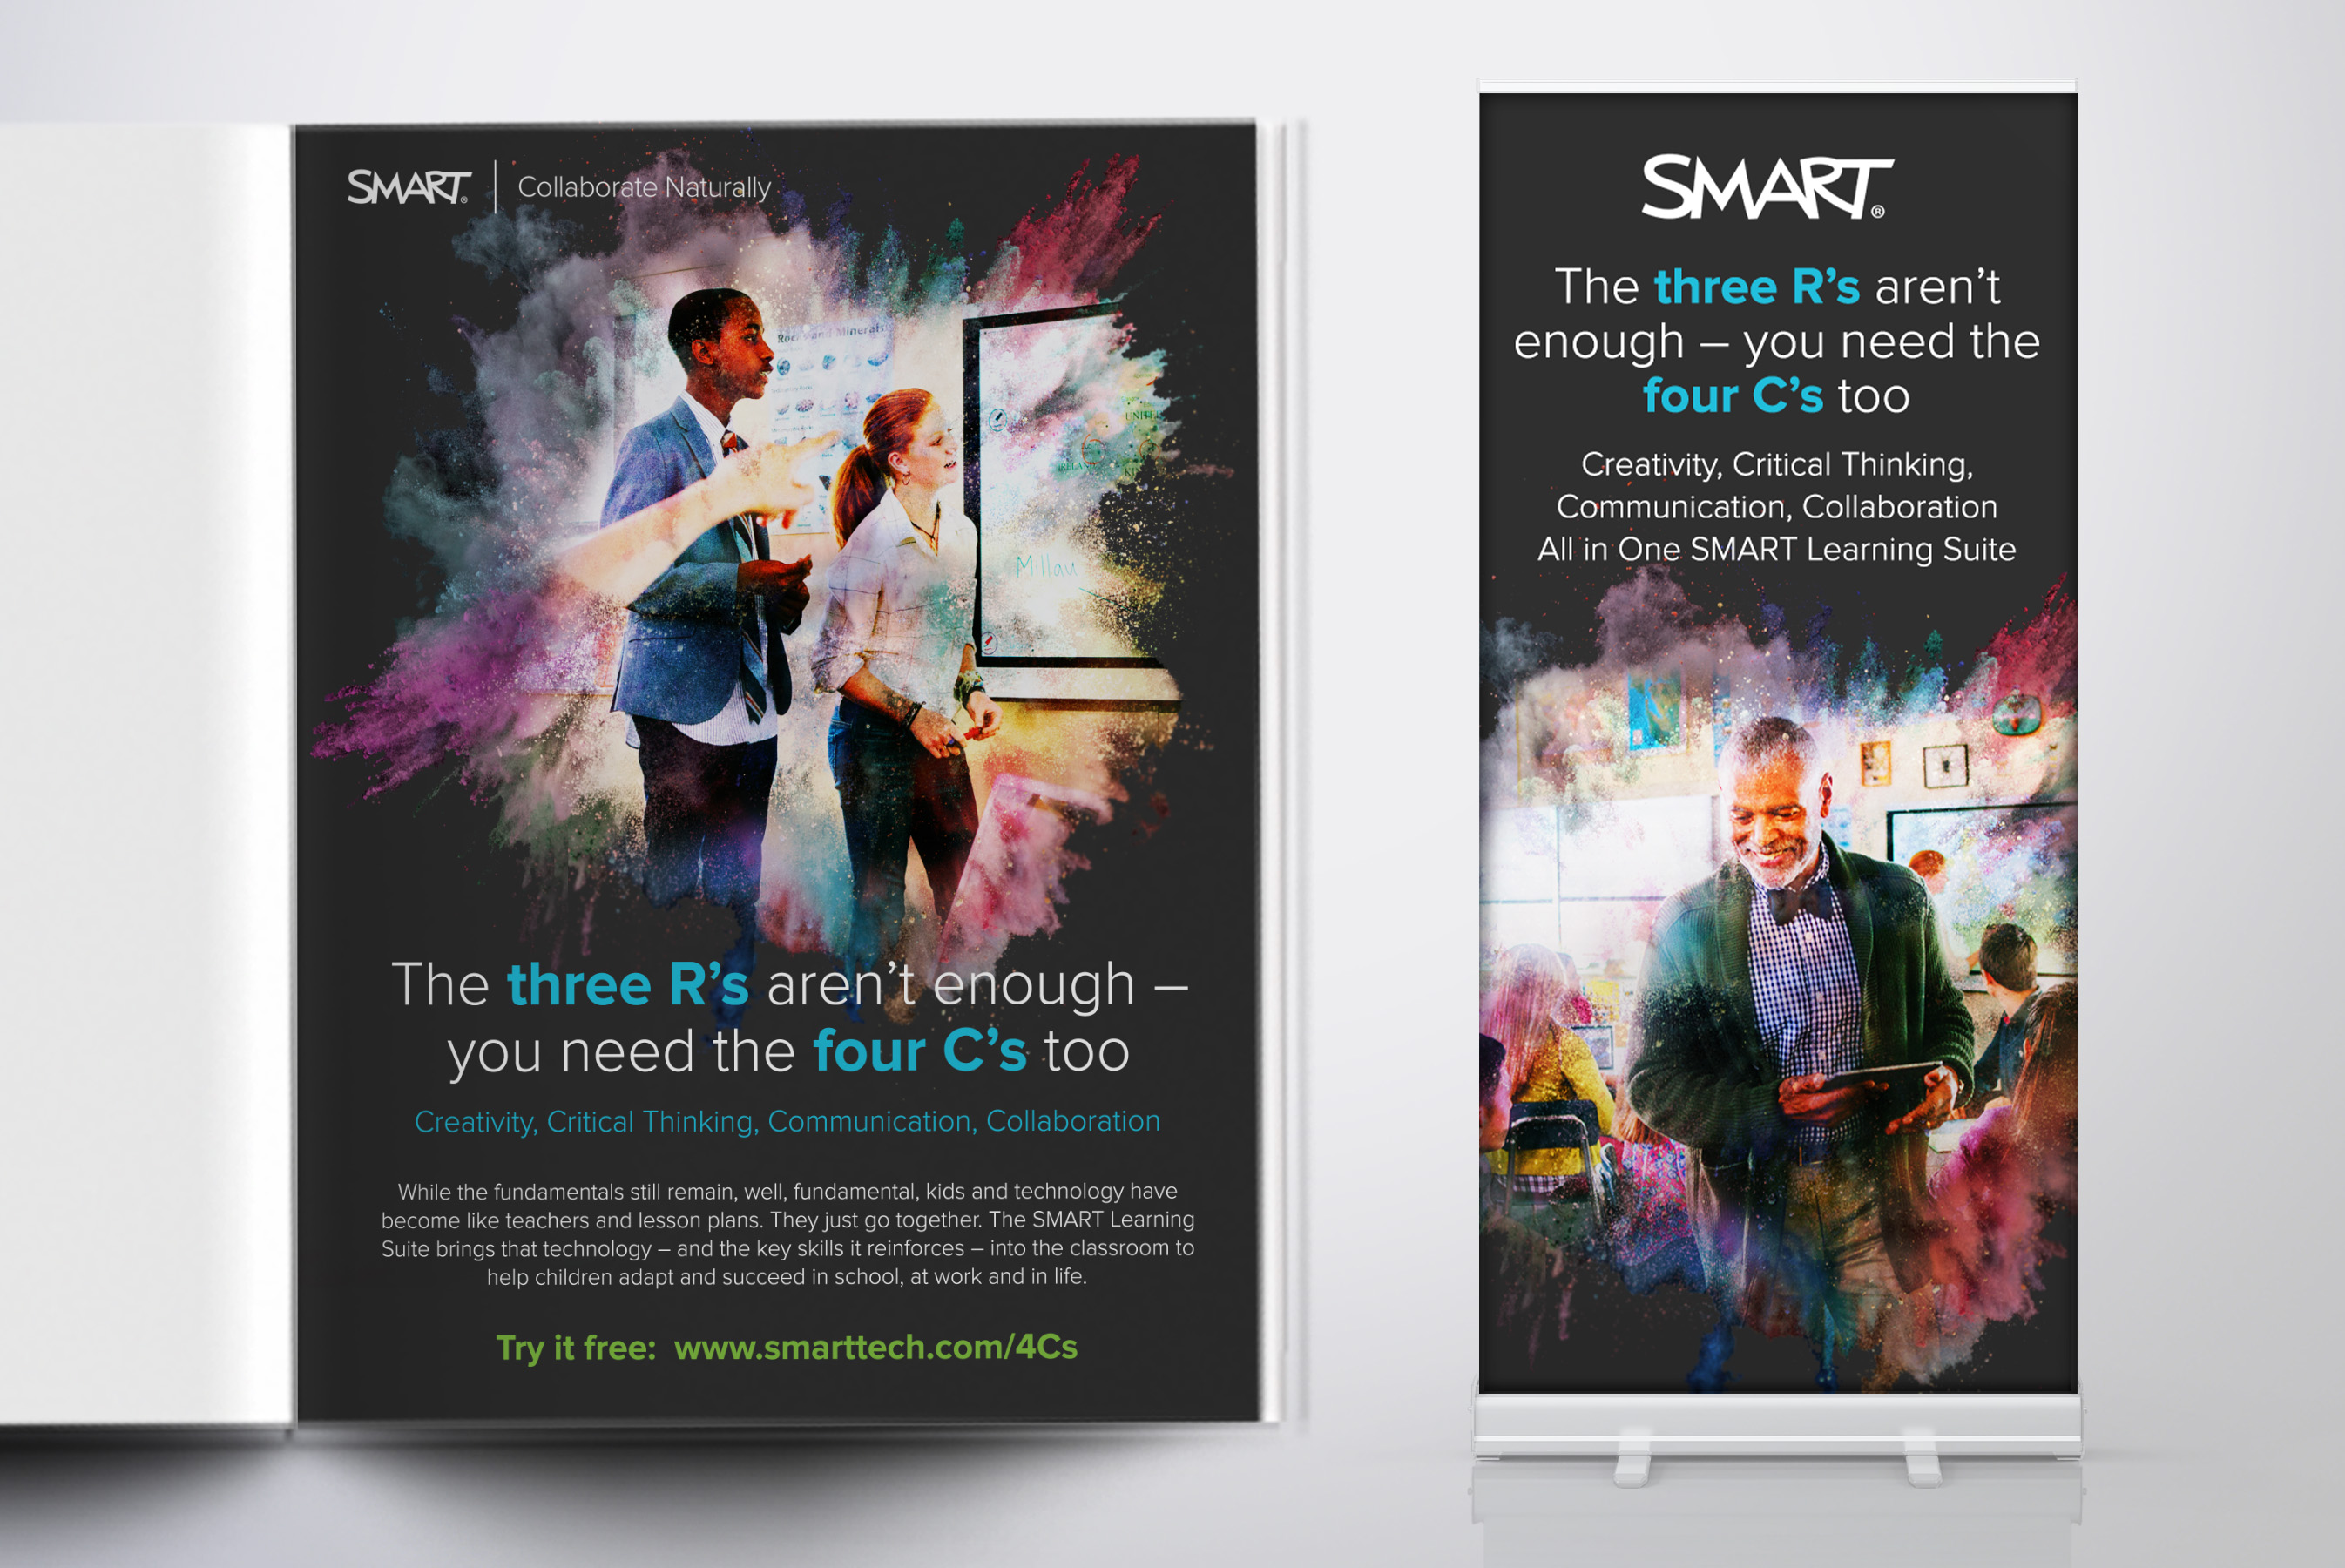 SMART Campaign Print Ad and Pull Up Banner